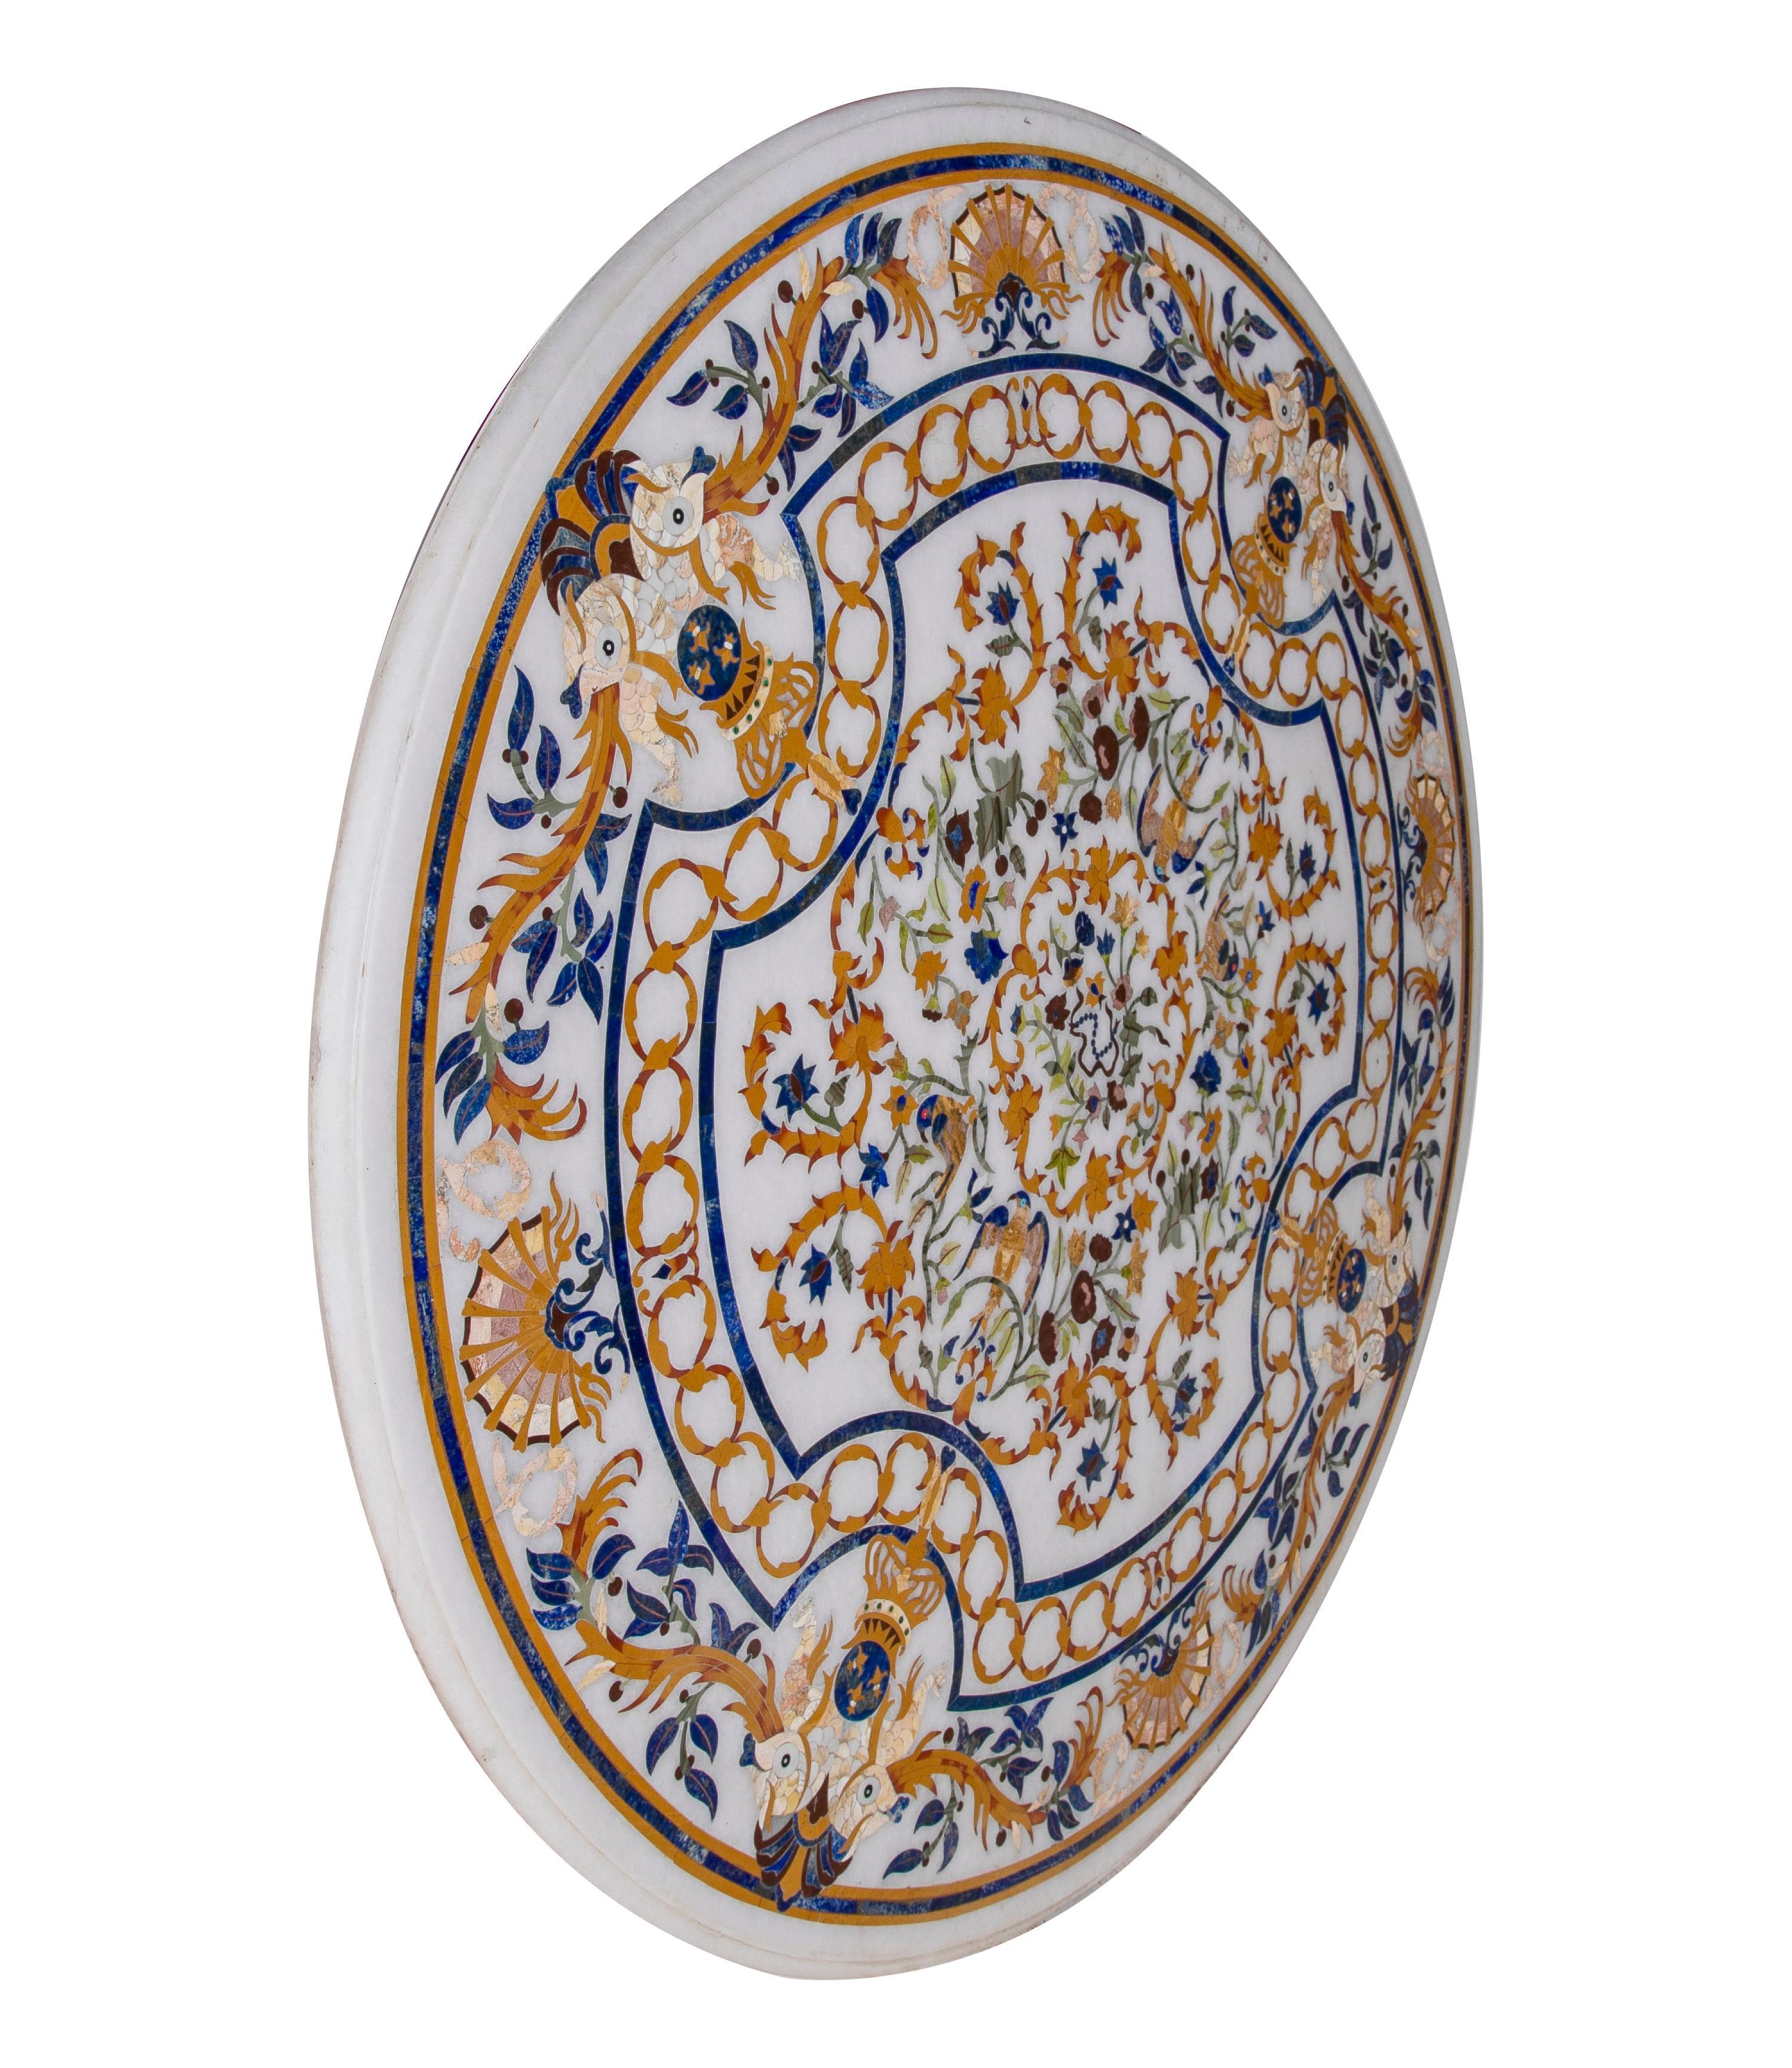 Classical Baroque 1990s Spanish handcrafted Pietra Dura mosaic inlay round white marble table top with lapis lazuli and an assortment of coloured marbles.